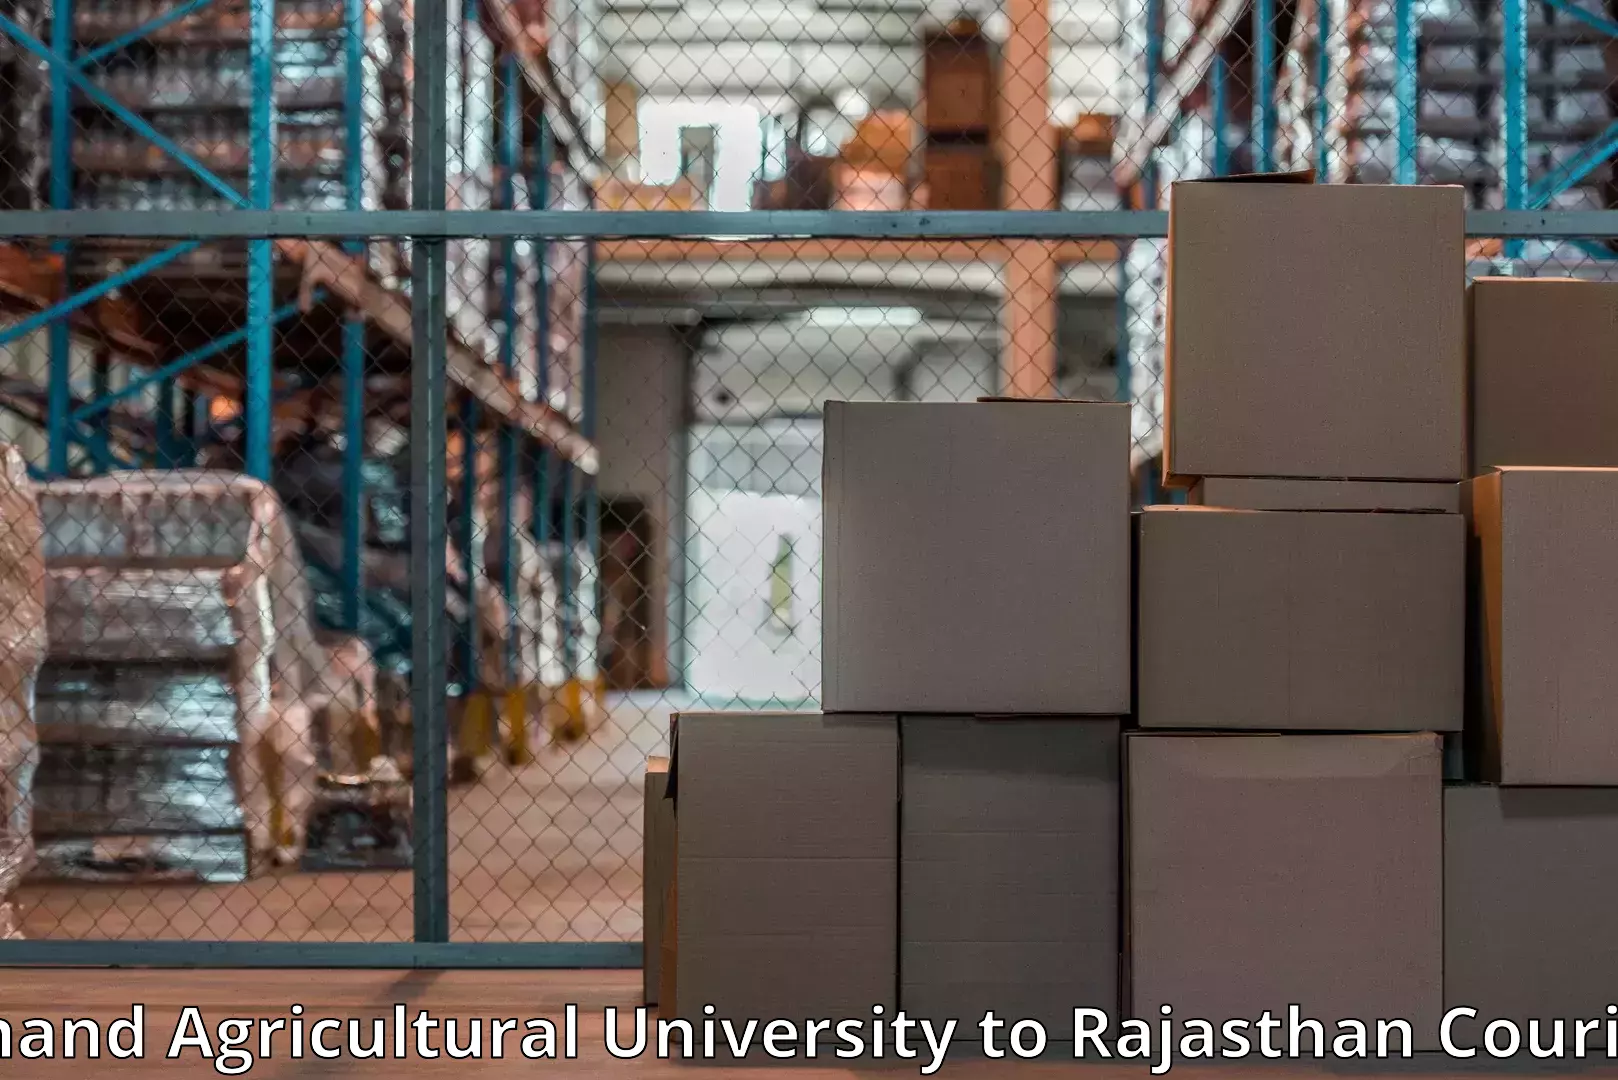 Professional furniture movers Anand Agricultural University to Kuchaman